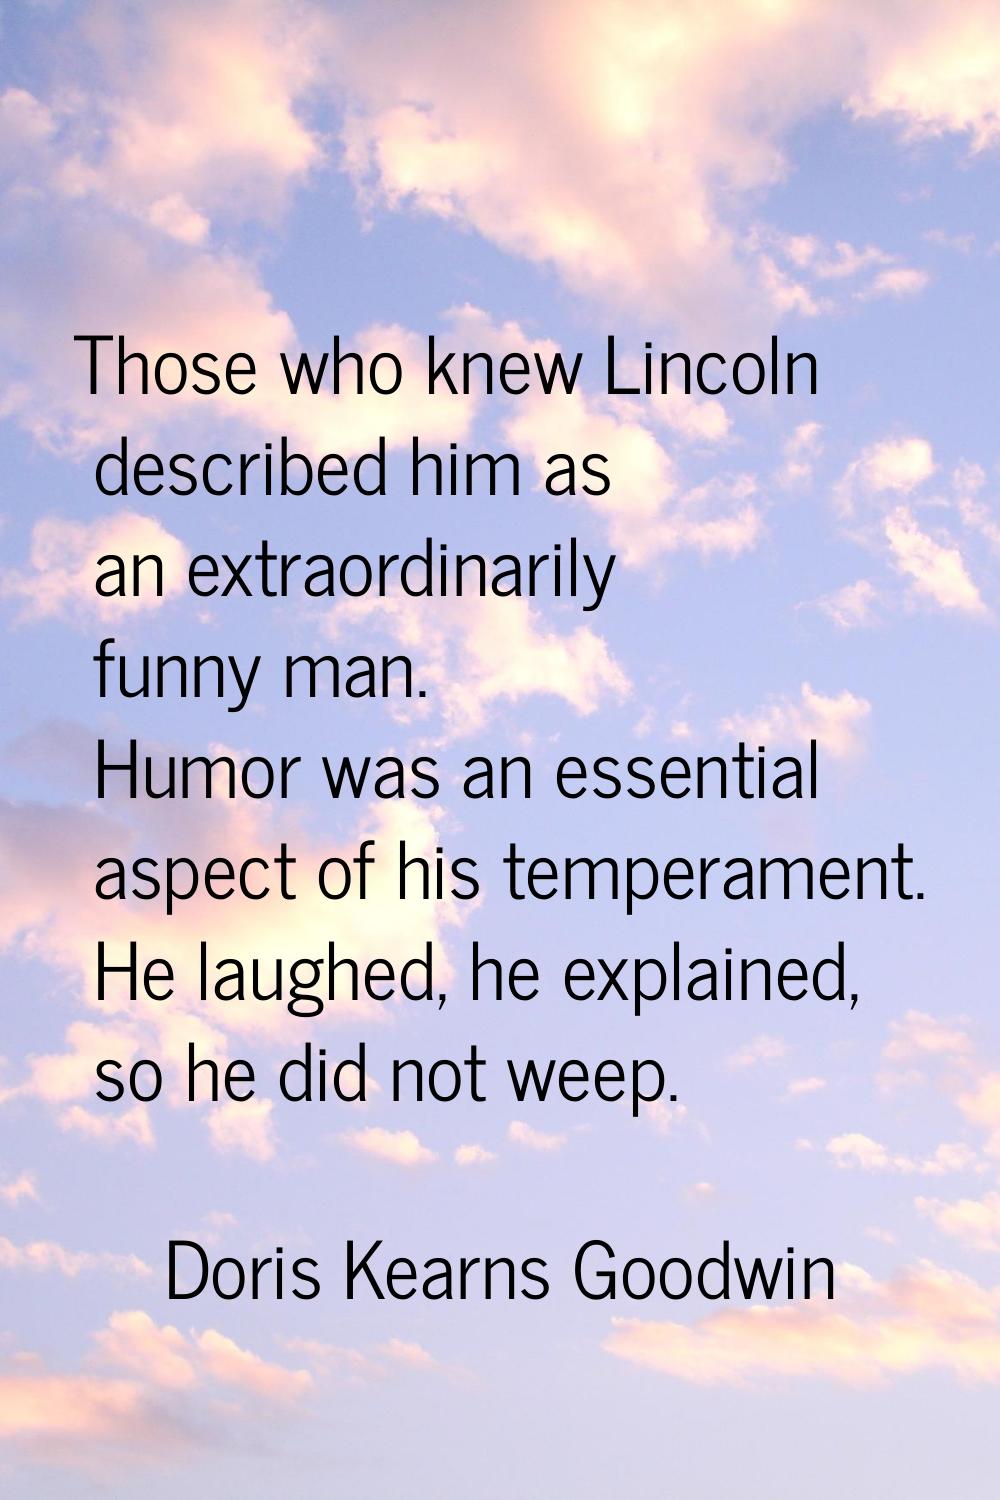 Those who knew Lincoln described him as an extraordinarily funny man. Humor was an essential aspect